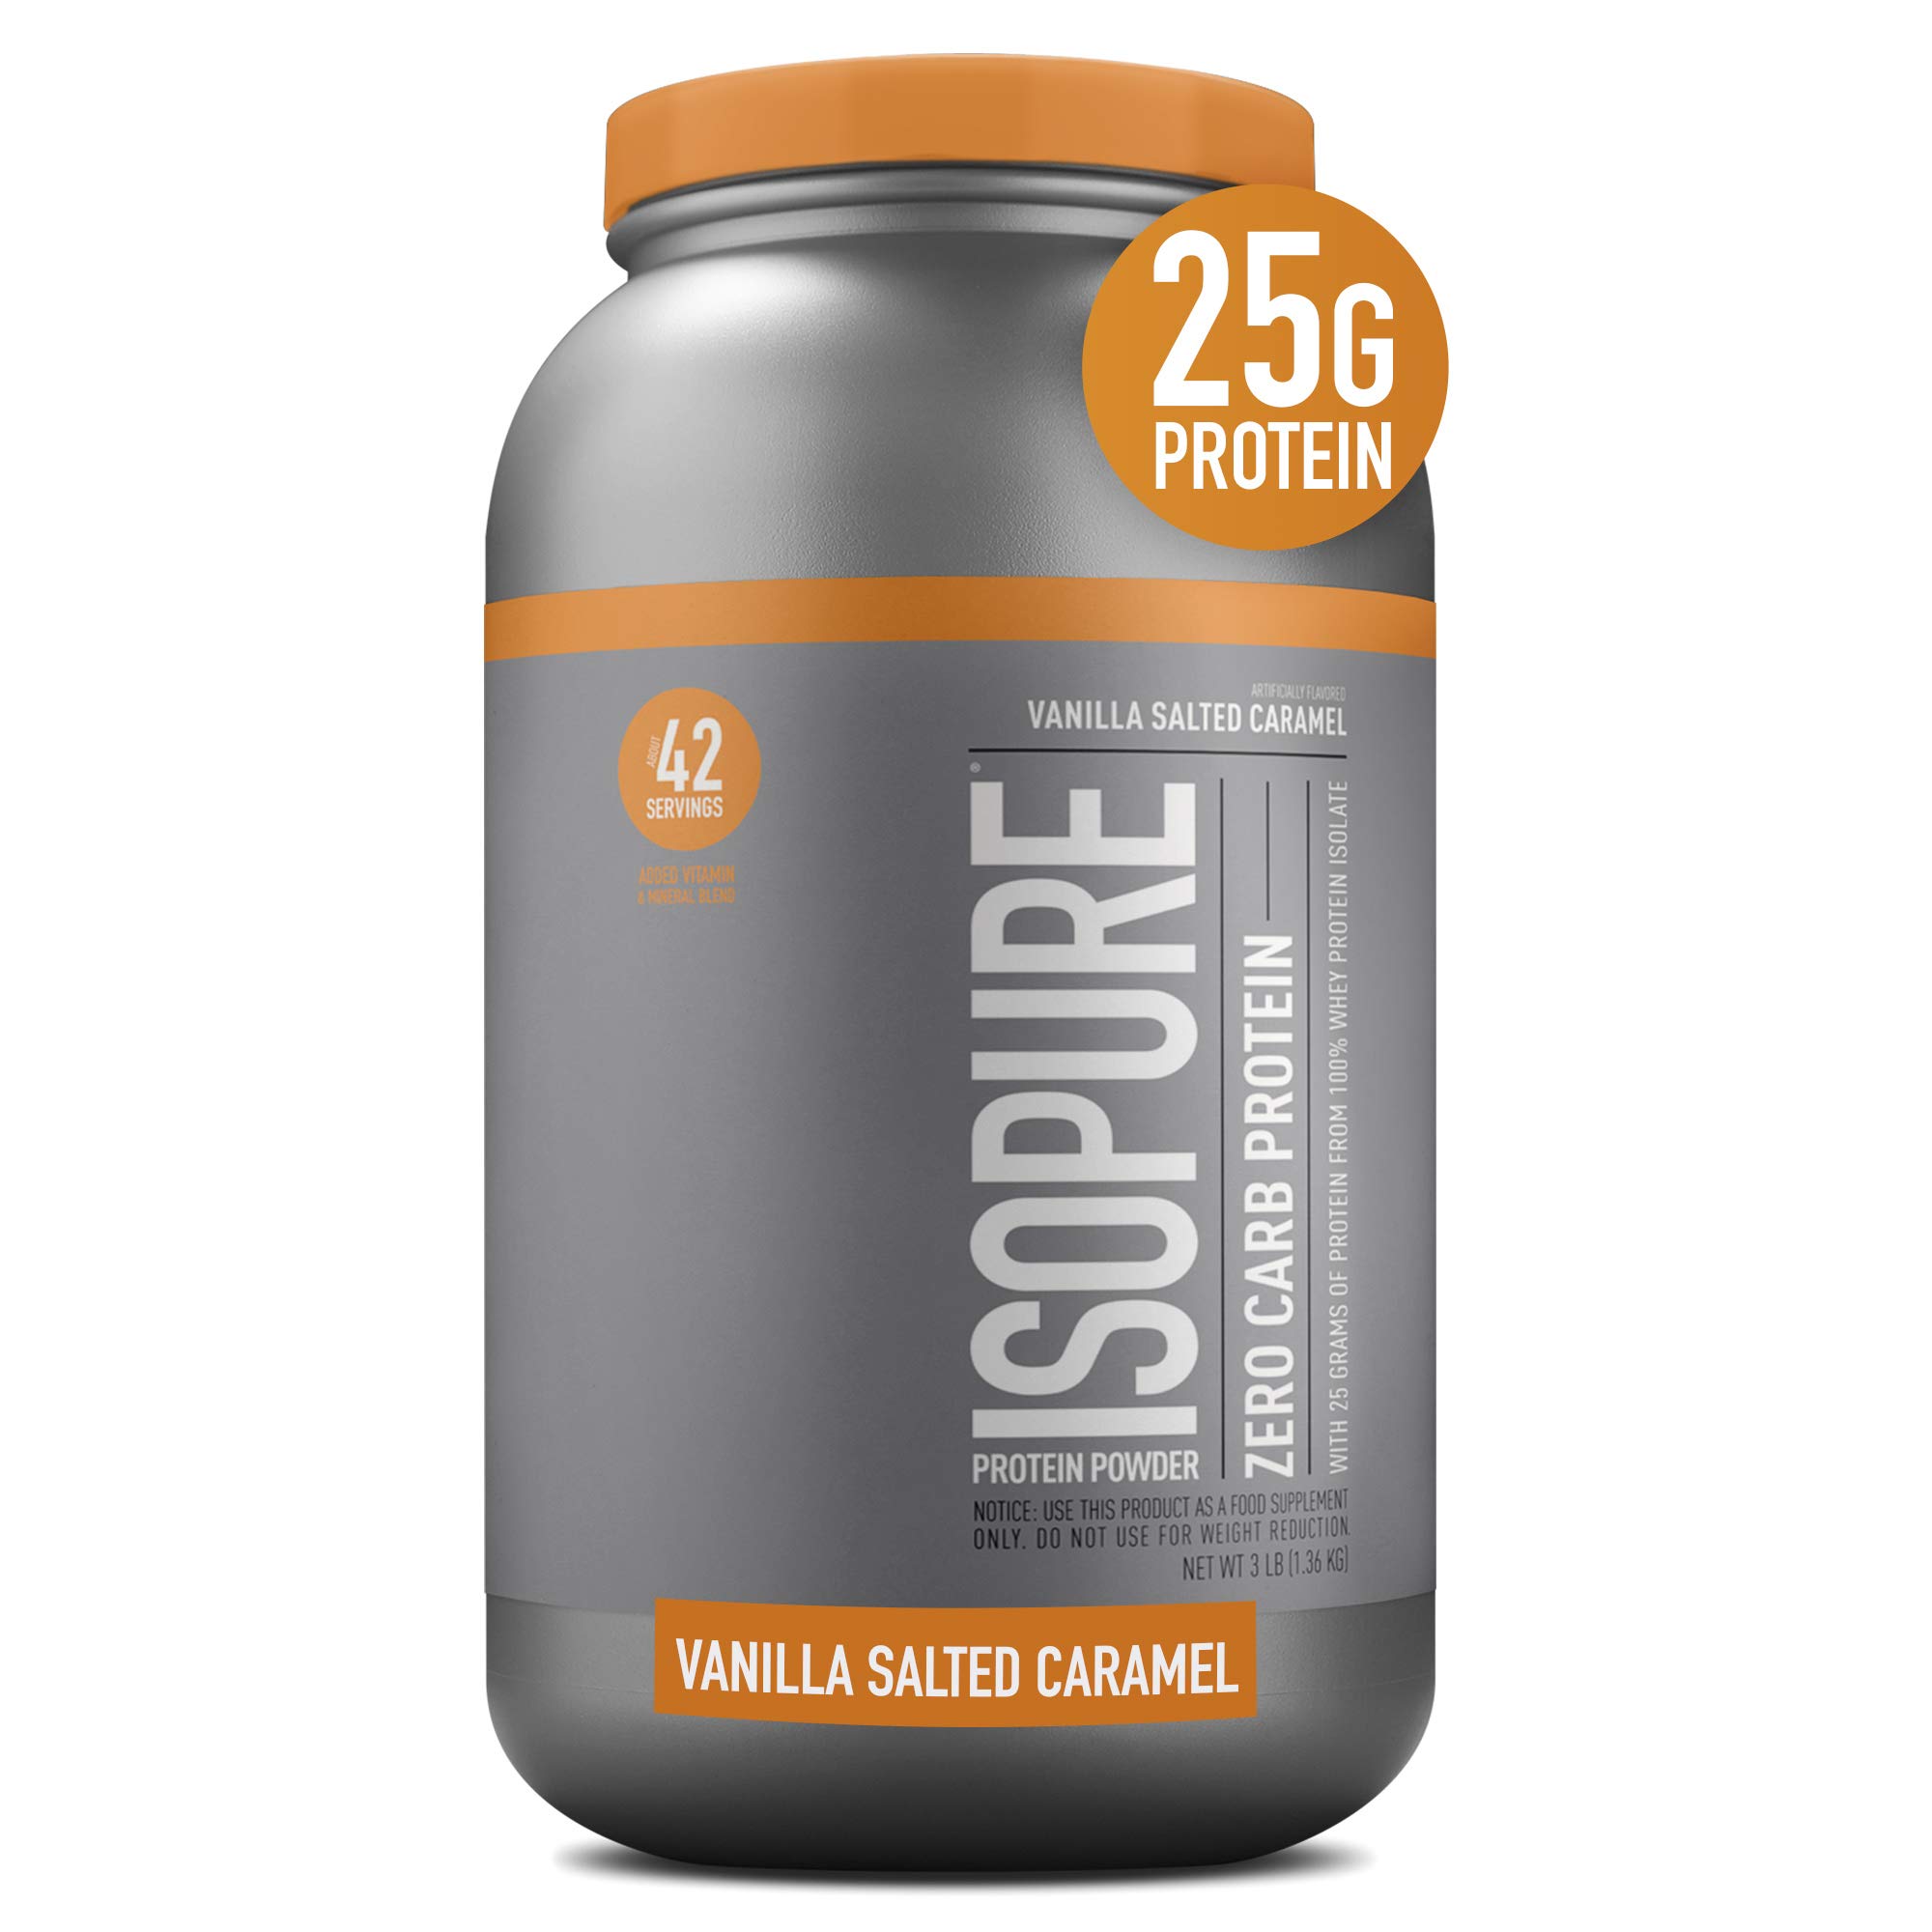 Isopure Protein Powder, Zero Carb Whey Isolate with Vitamin C & Zinc for Immune Support, 25g Protein, Keto Friendly, Vanilla Salted Caramel, 42 Servings, 3 Pounds (Packaging May Vary)